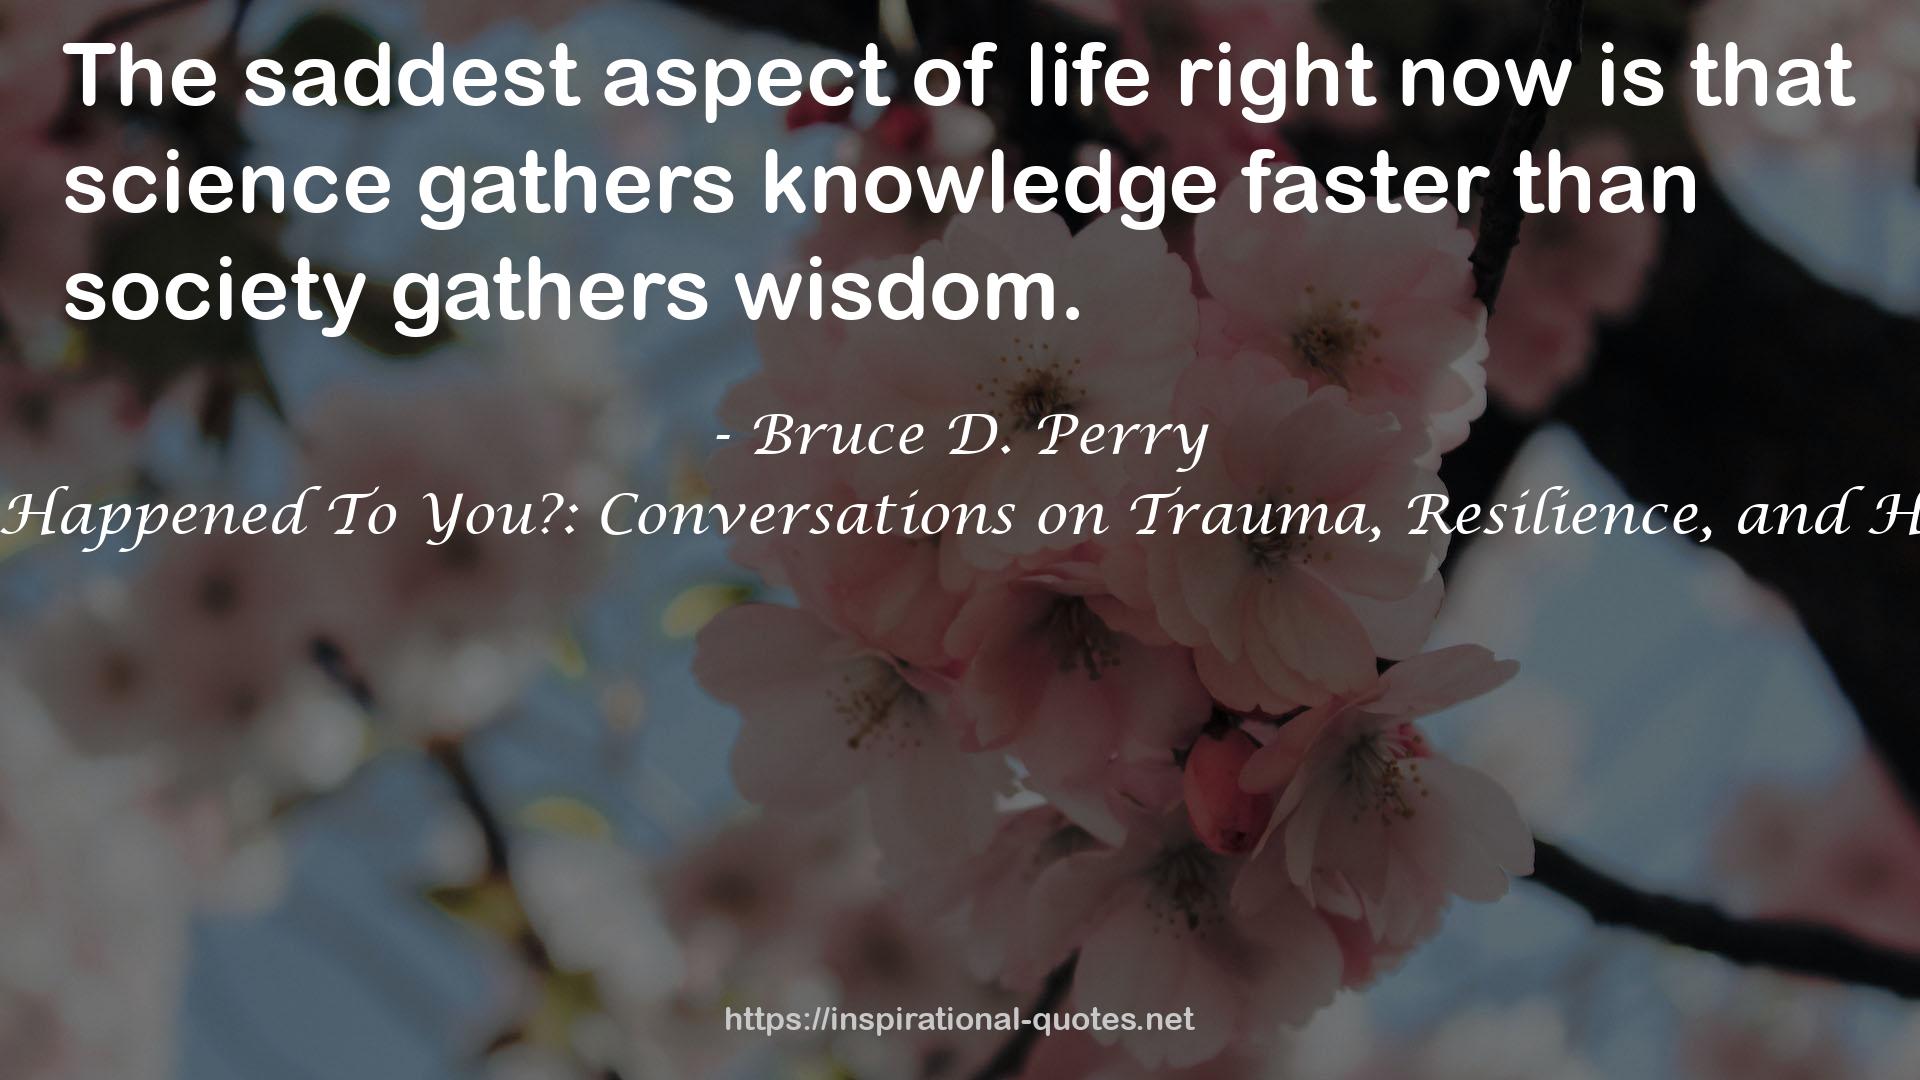 What Happened To You?: Conversations on Trauma, Resilience, and Healing QUOTES